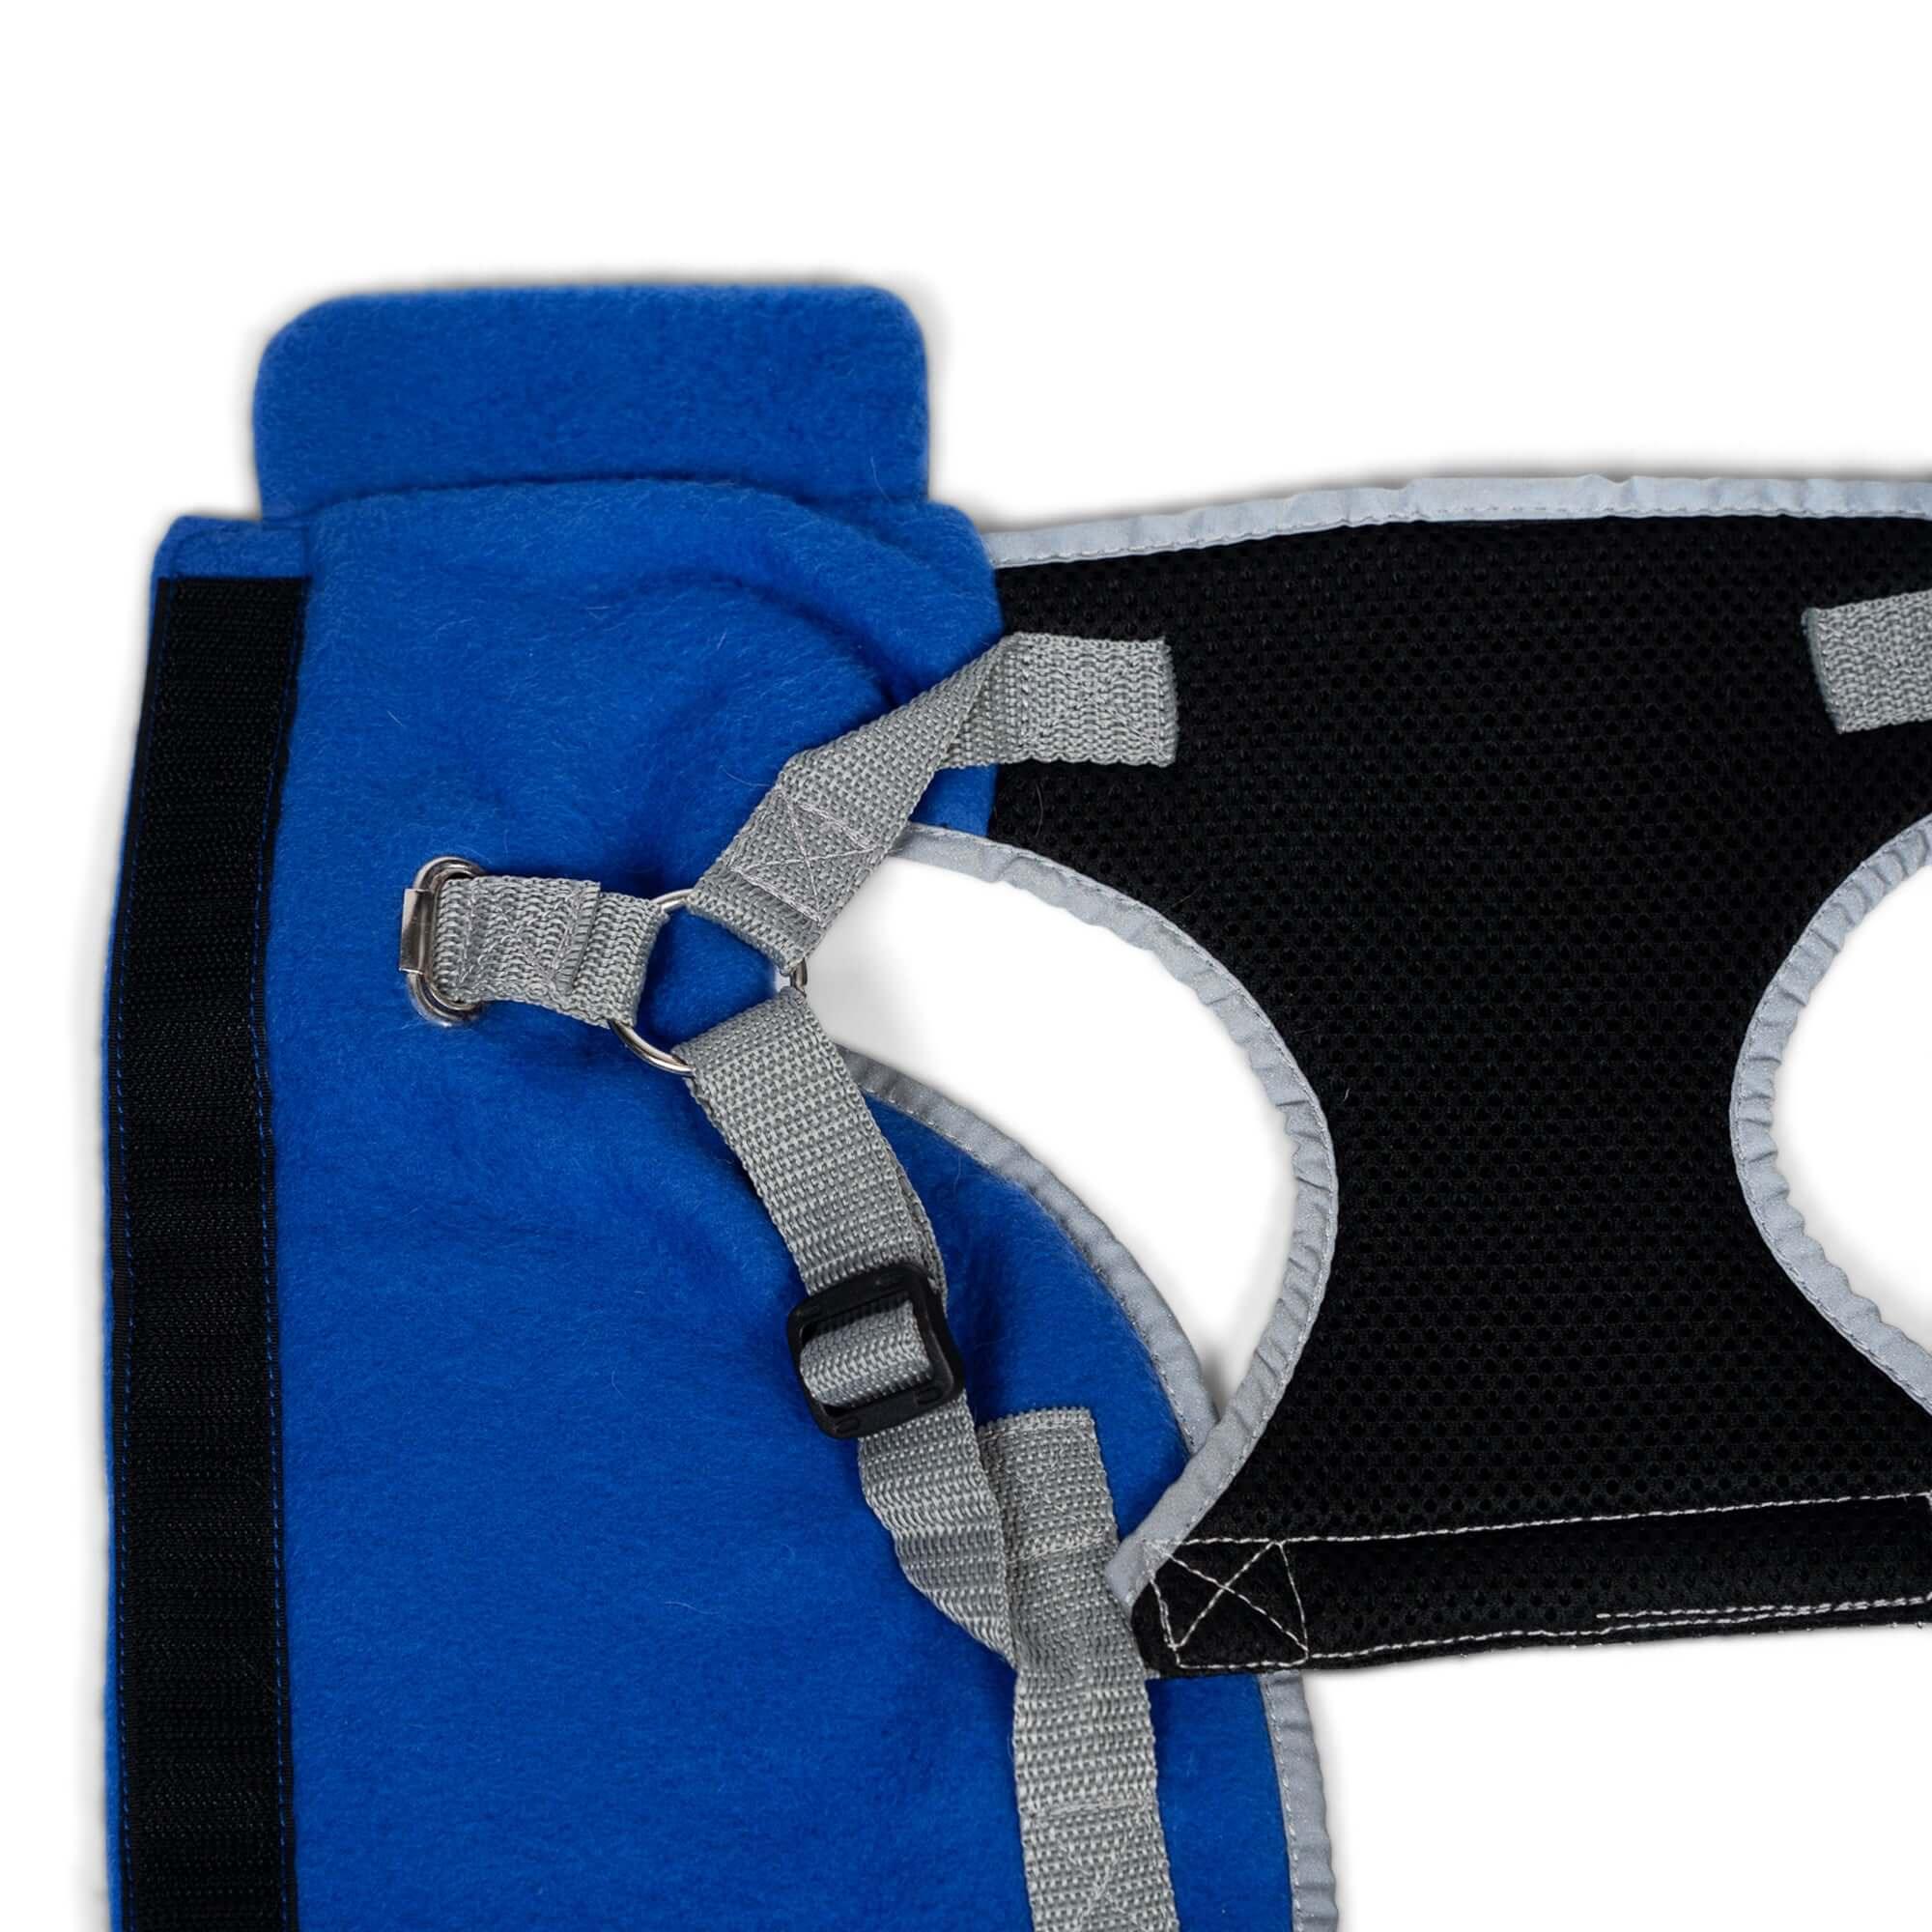 2-in-1 Travel Dog Vest With Built In Harness - Royal Blue FajarShuruqSA